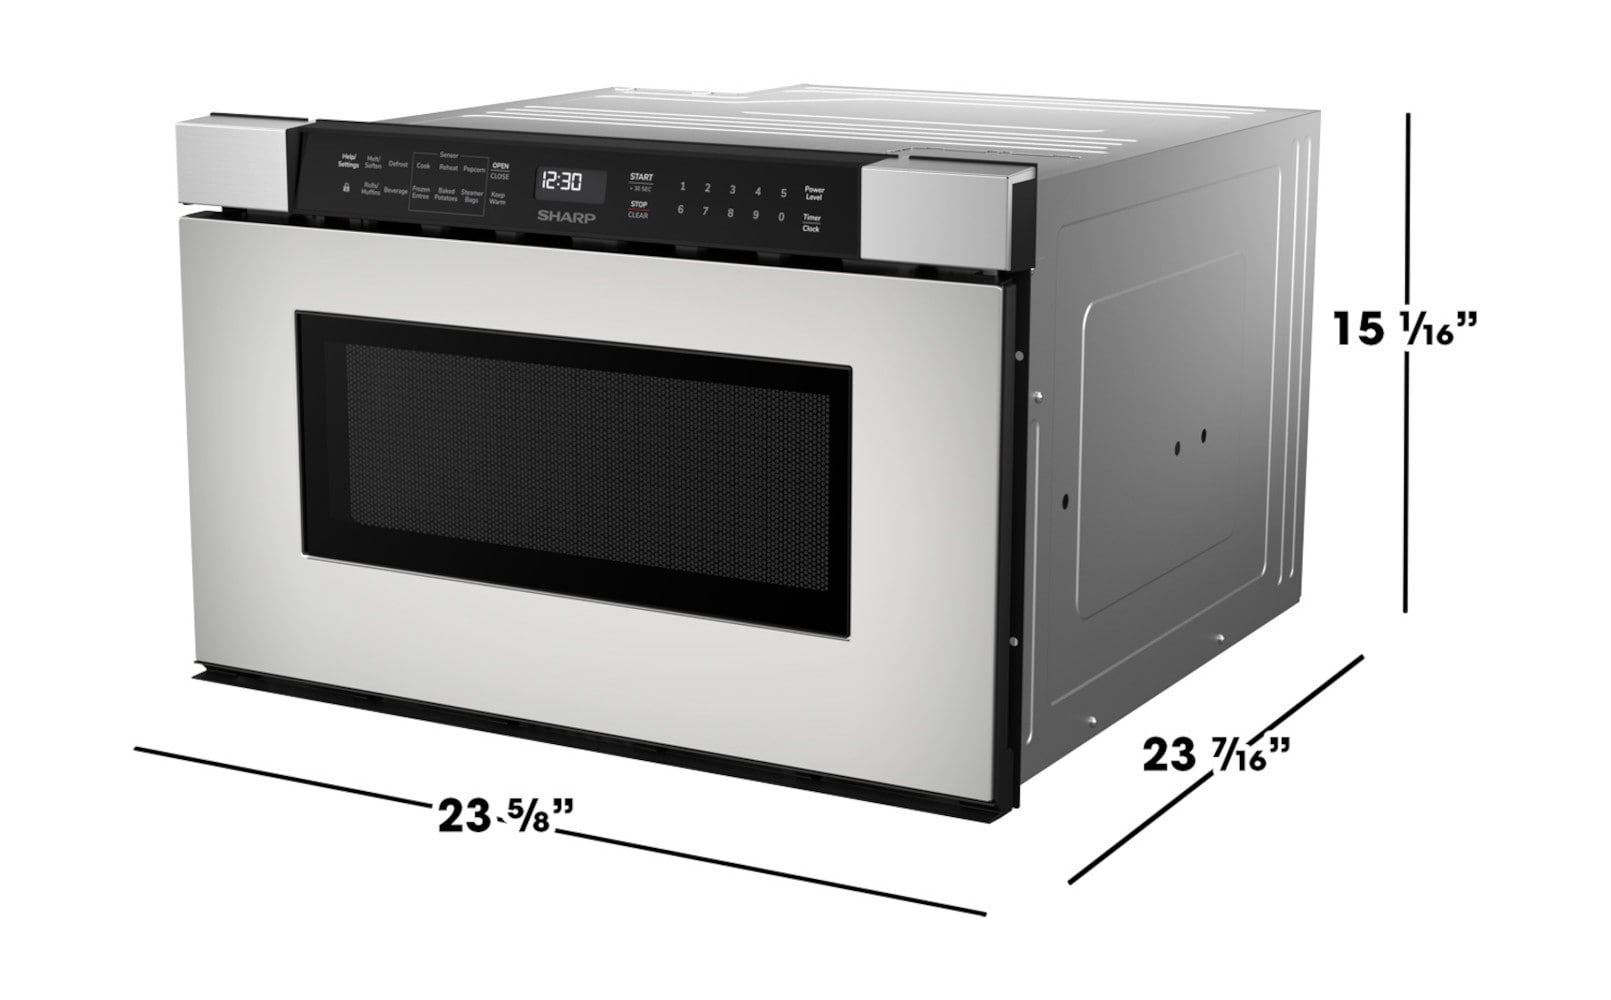 Sharp 1.1 Cu. ft. Stainless Steel Convection Over-the-range Microwave Oven